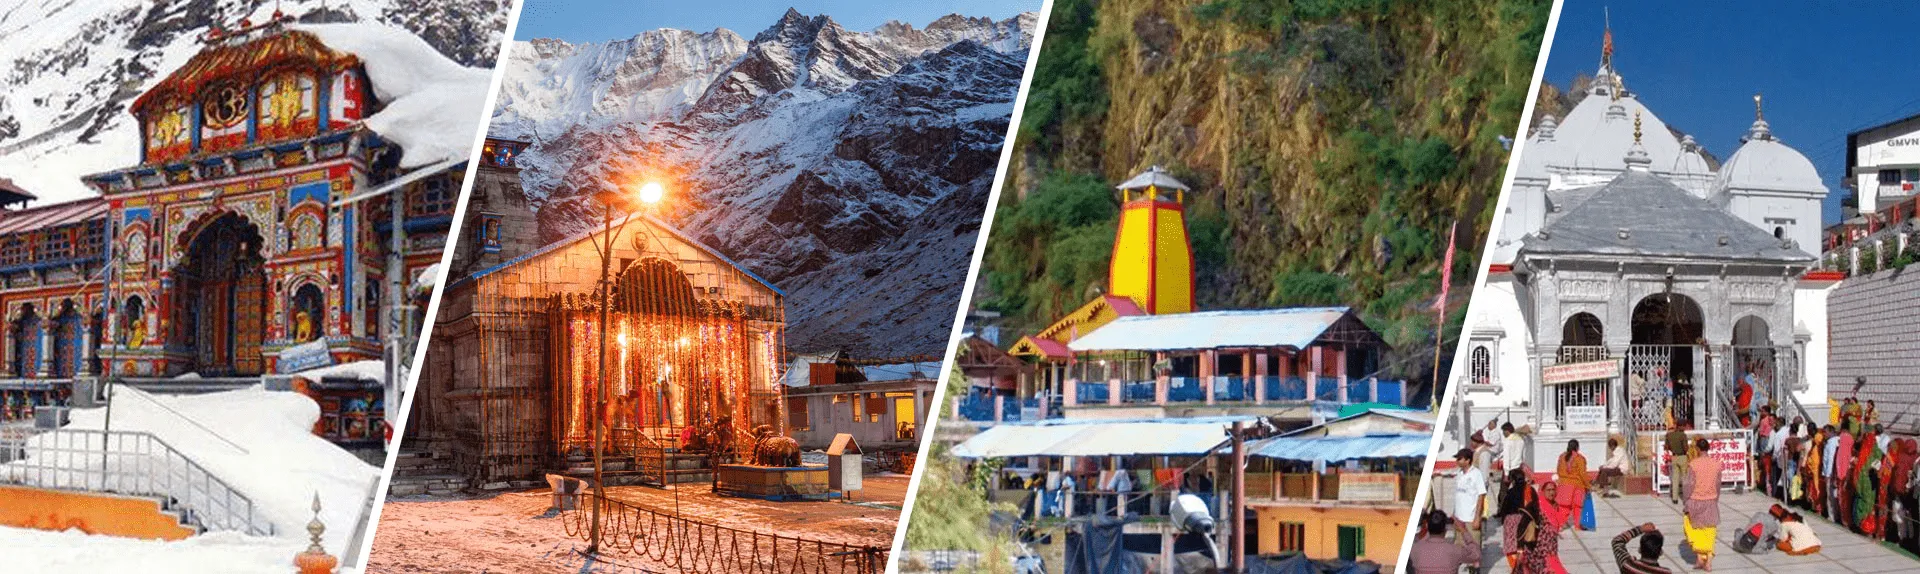 Chardham Yatra tour Package from Jaipur